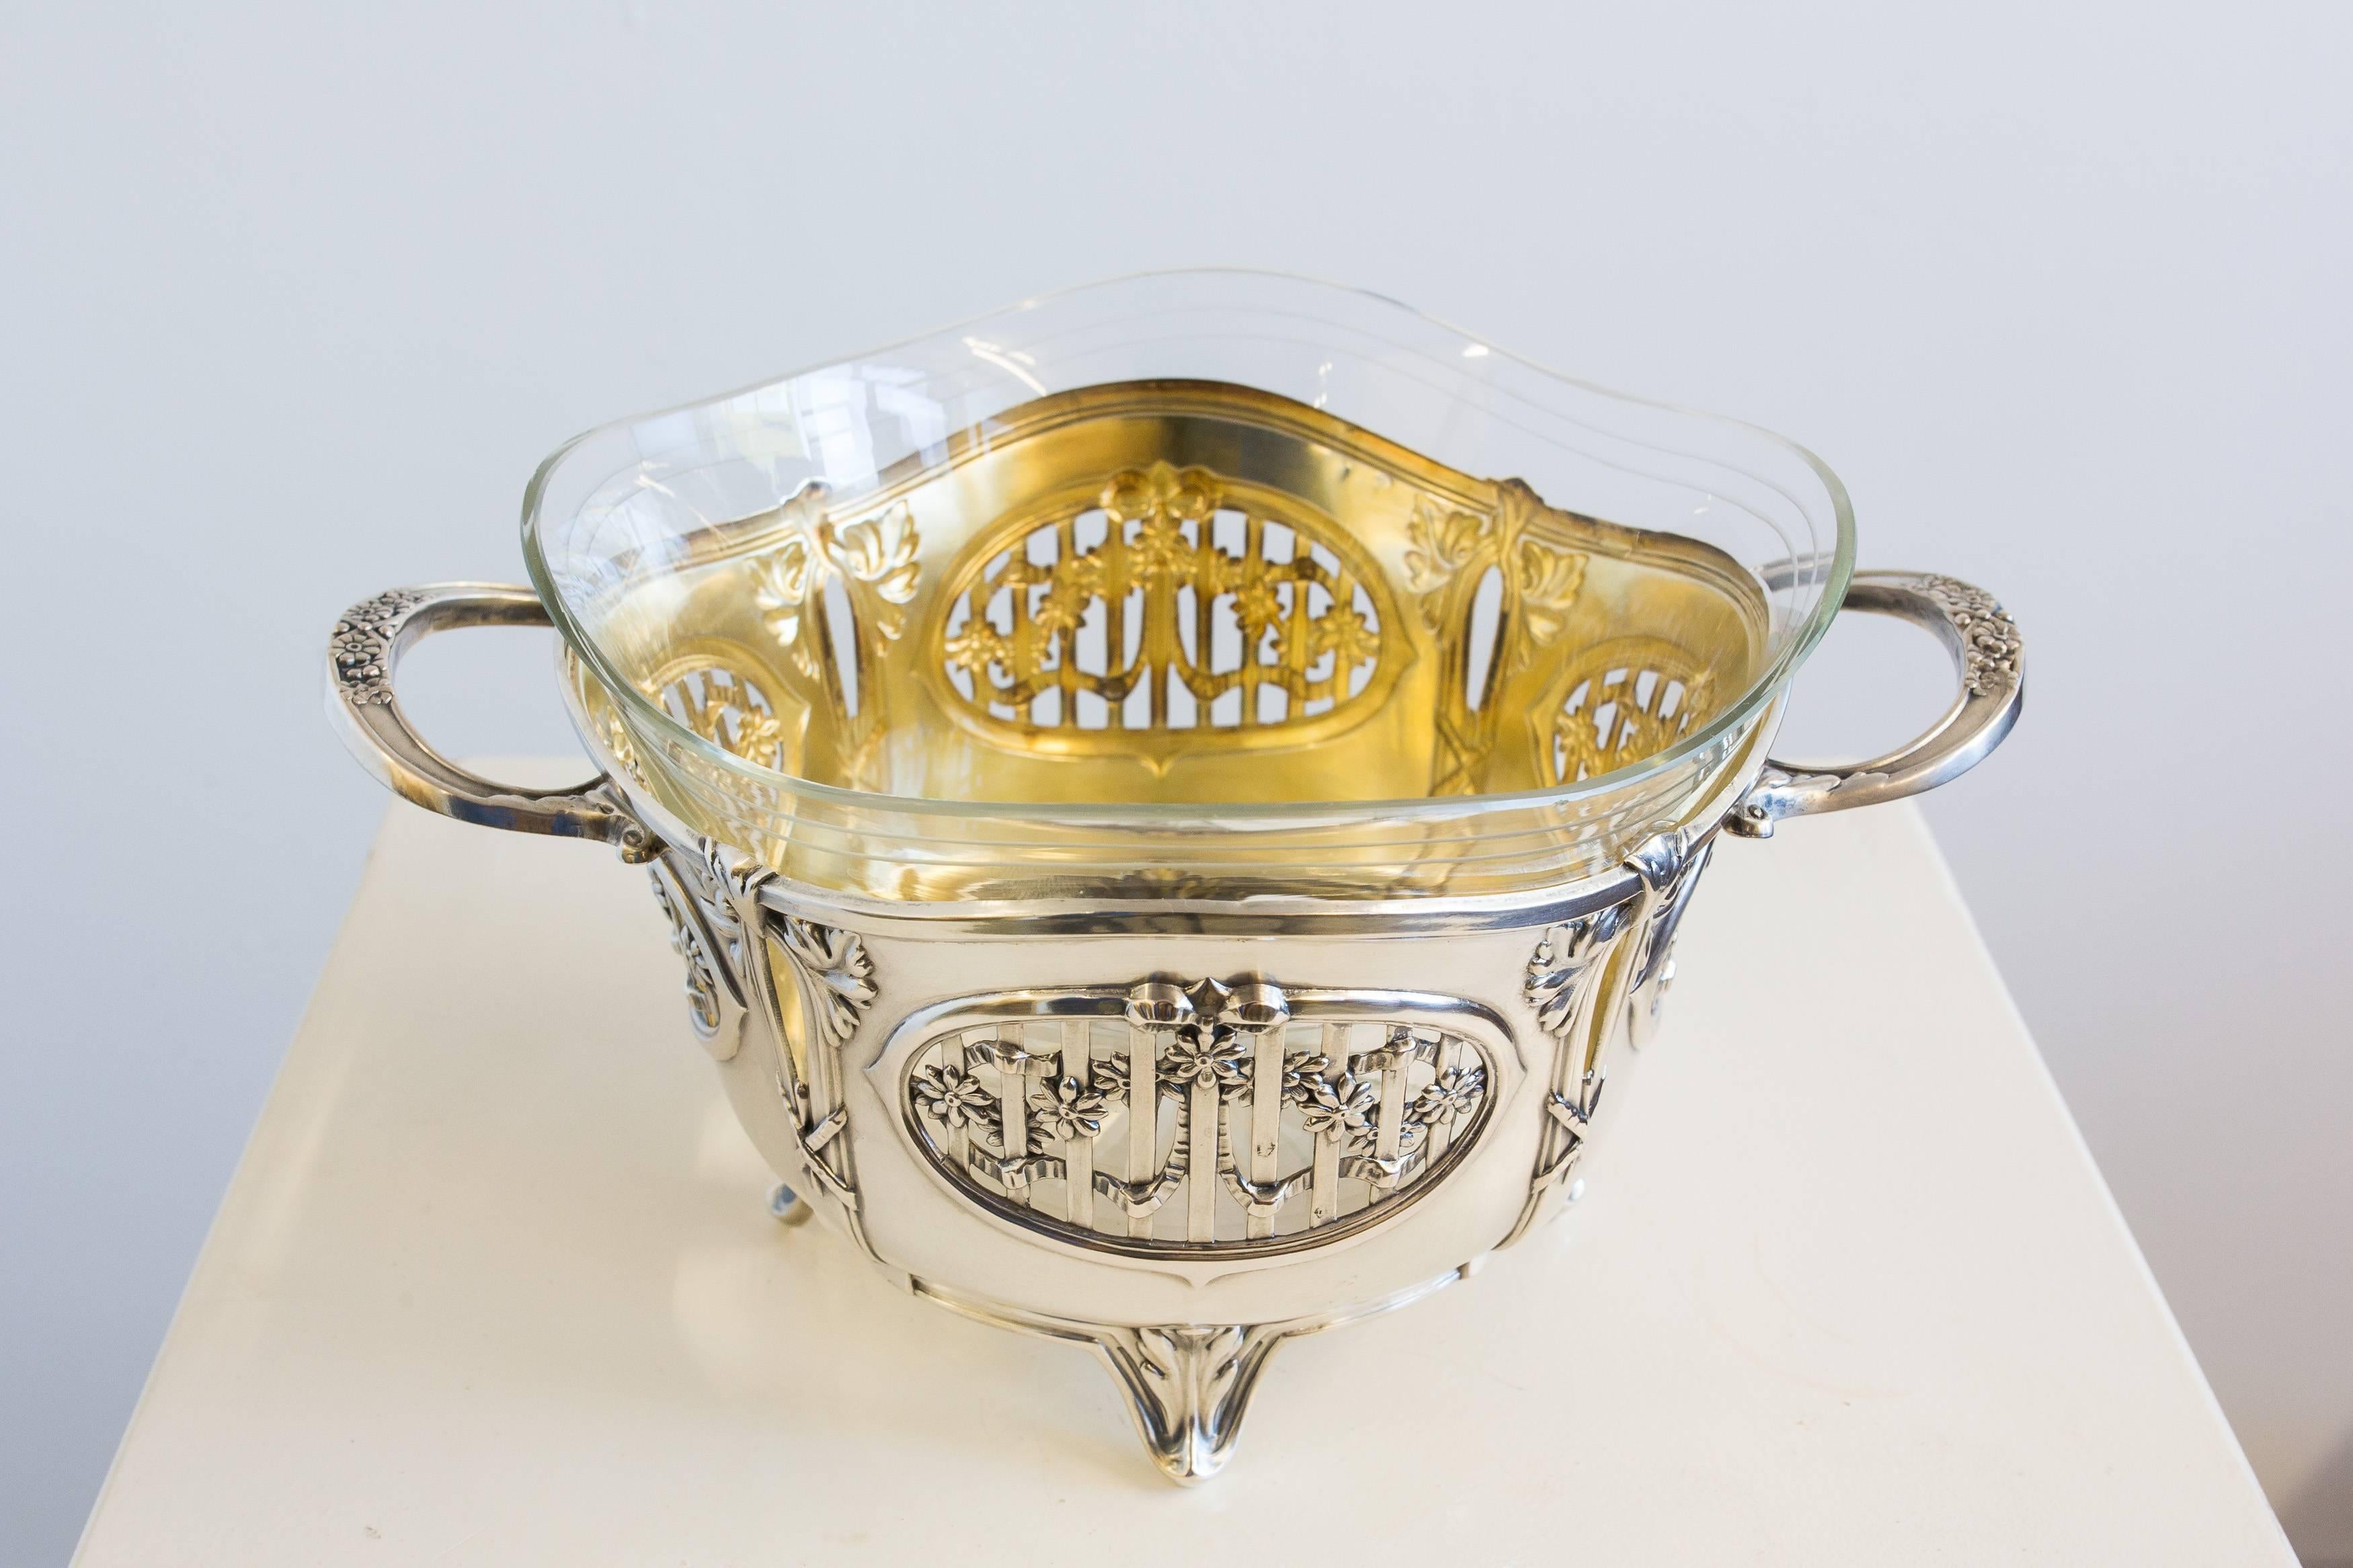 The wonderful Art Nouveau openwork design combined with the hand-cut glass bowl makes this 800 silver confectionery bowl from Germany (circa 1900) a real elegant table decoration. It is stamped with the German authority and Austrian import